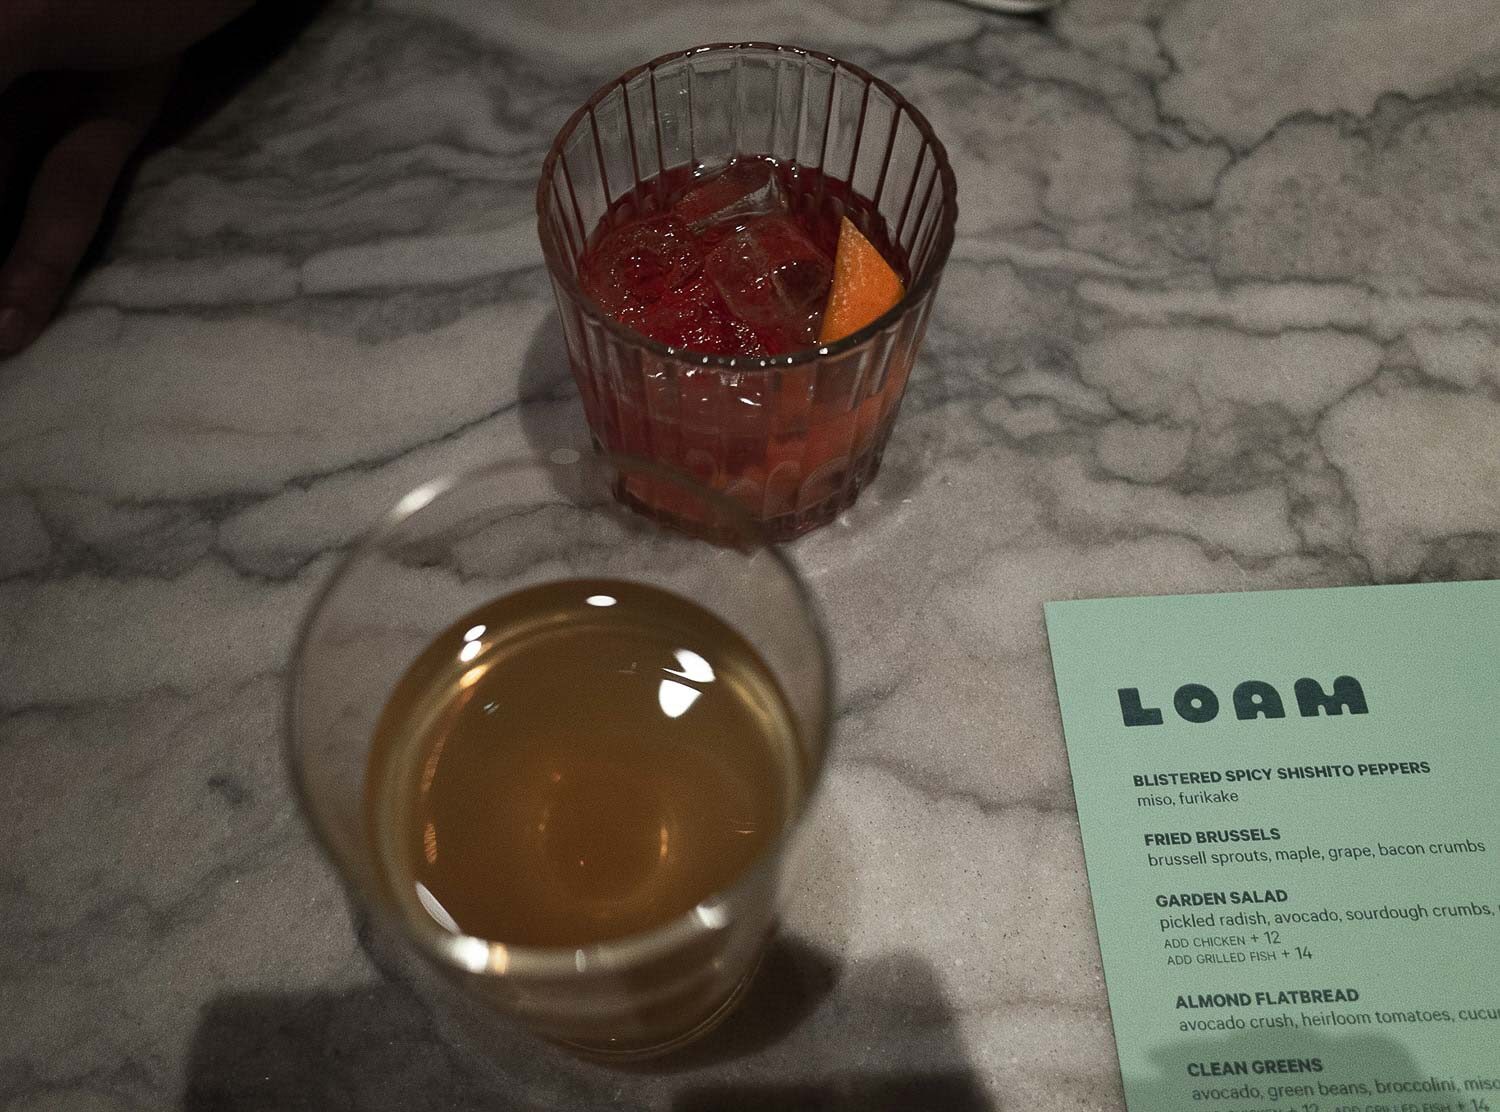 Ace Hotel Sydney Drinks as good as the fare at Loam